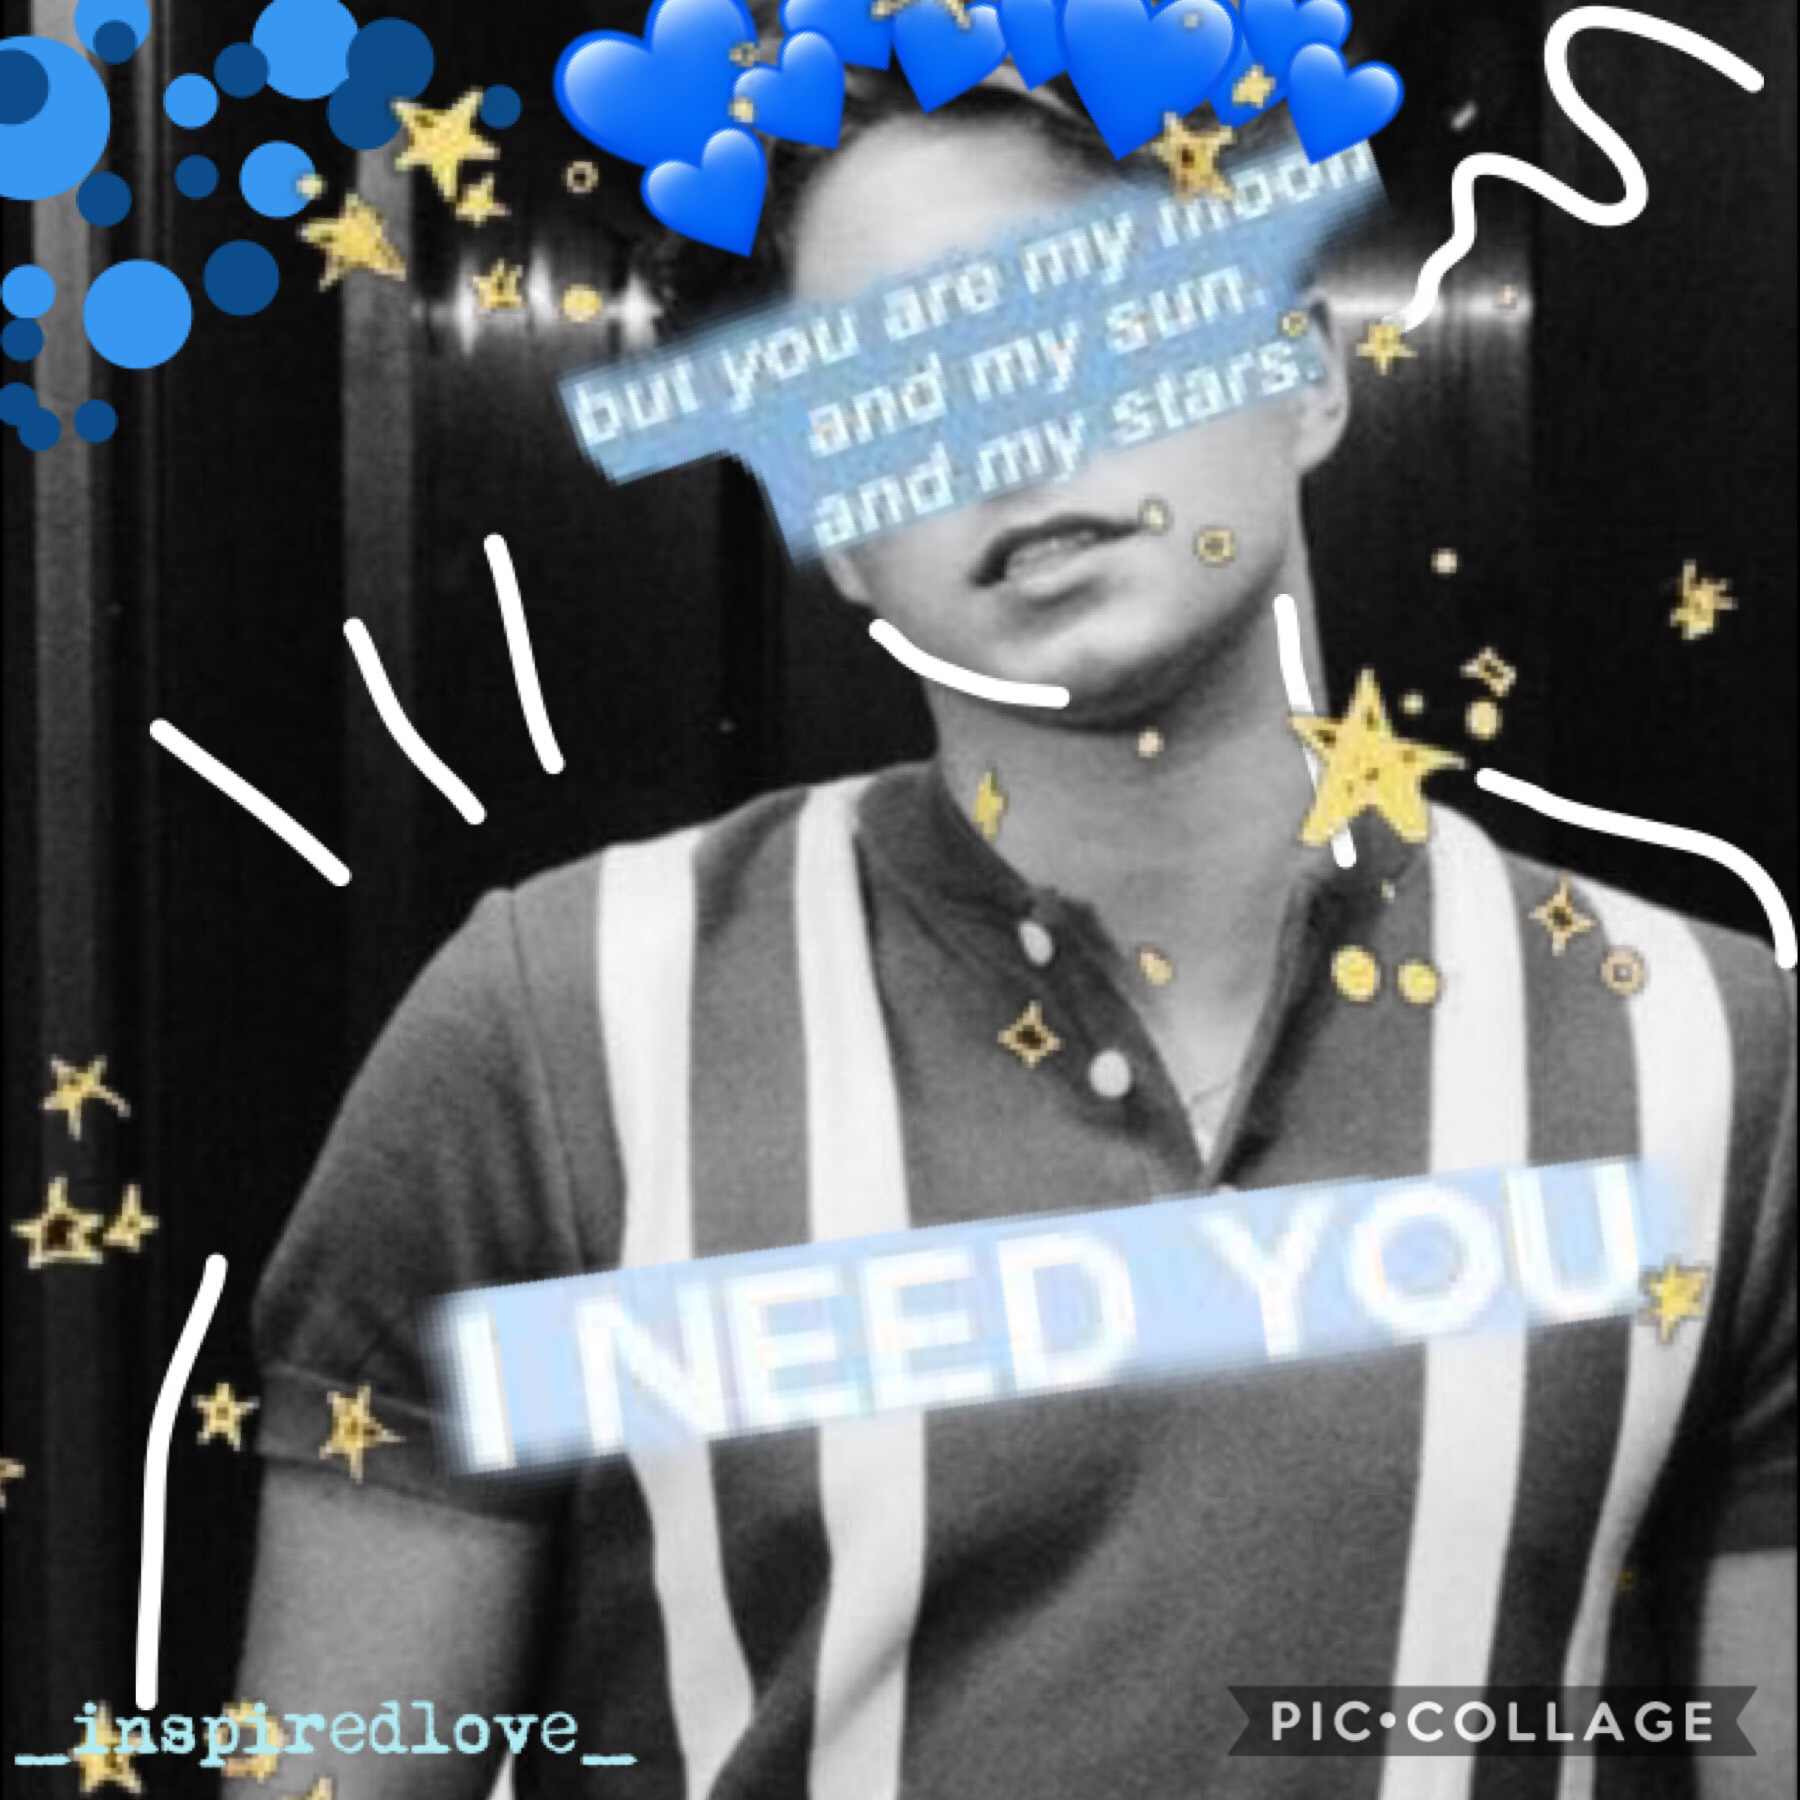 Bradley Simpson from the band ‘The Vamps’ 💘🥰 ughhh he’s so cute😂 
anyways, i don’t really have much else to say so... have a good day/night 💖